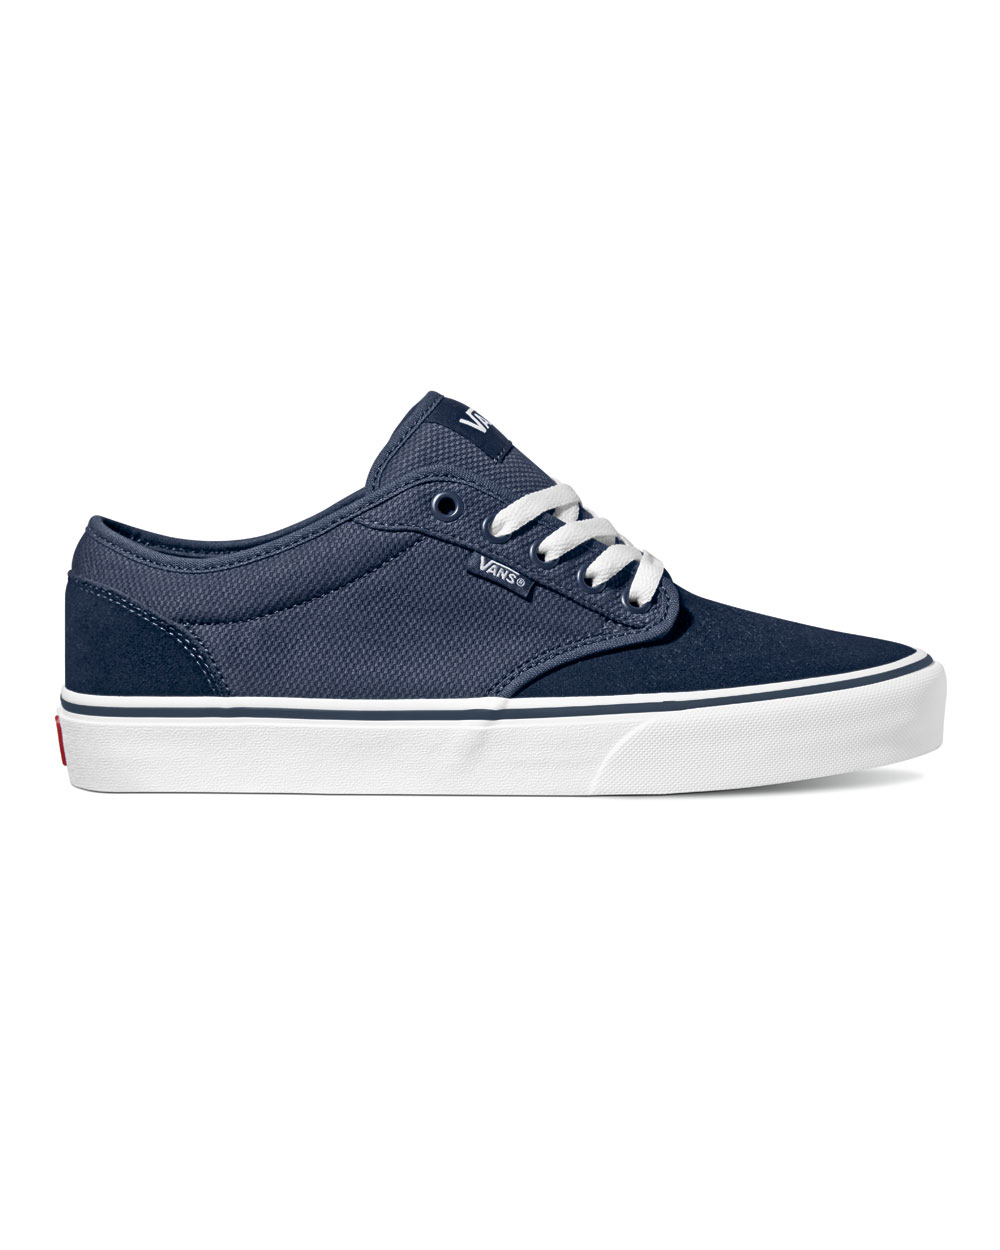 Vans Atwood Textile Suede (navy/white 